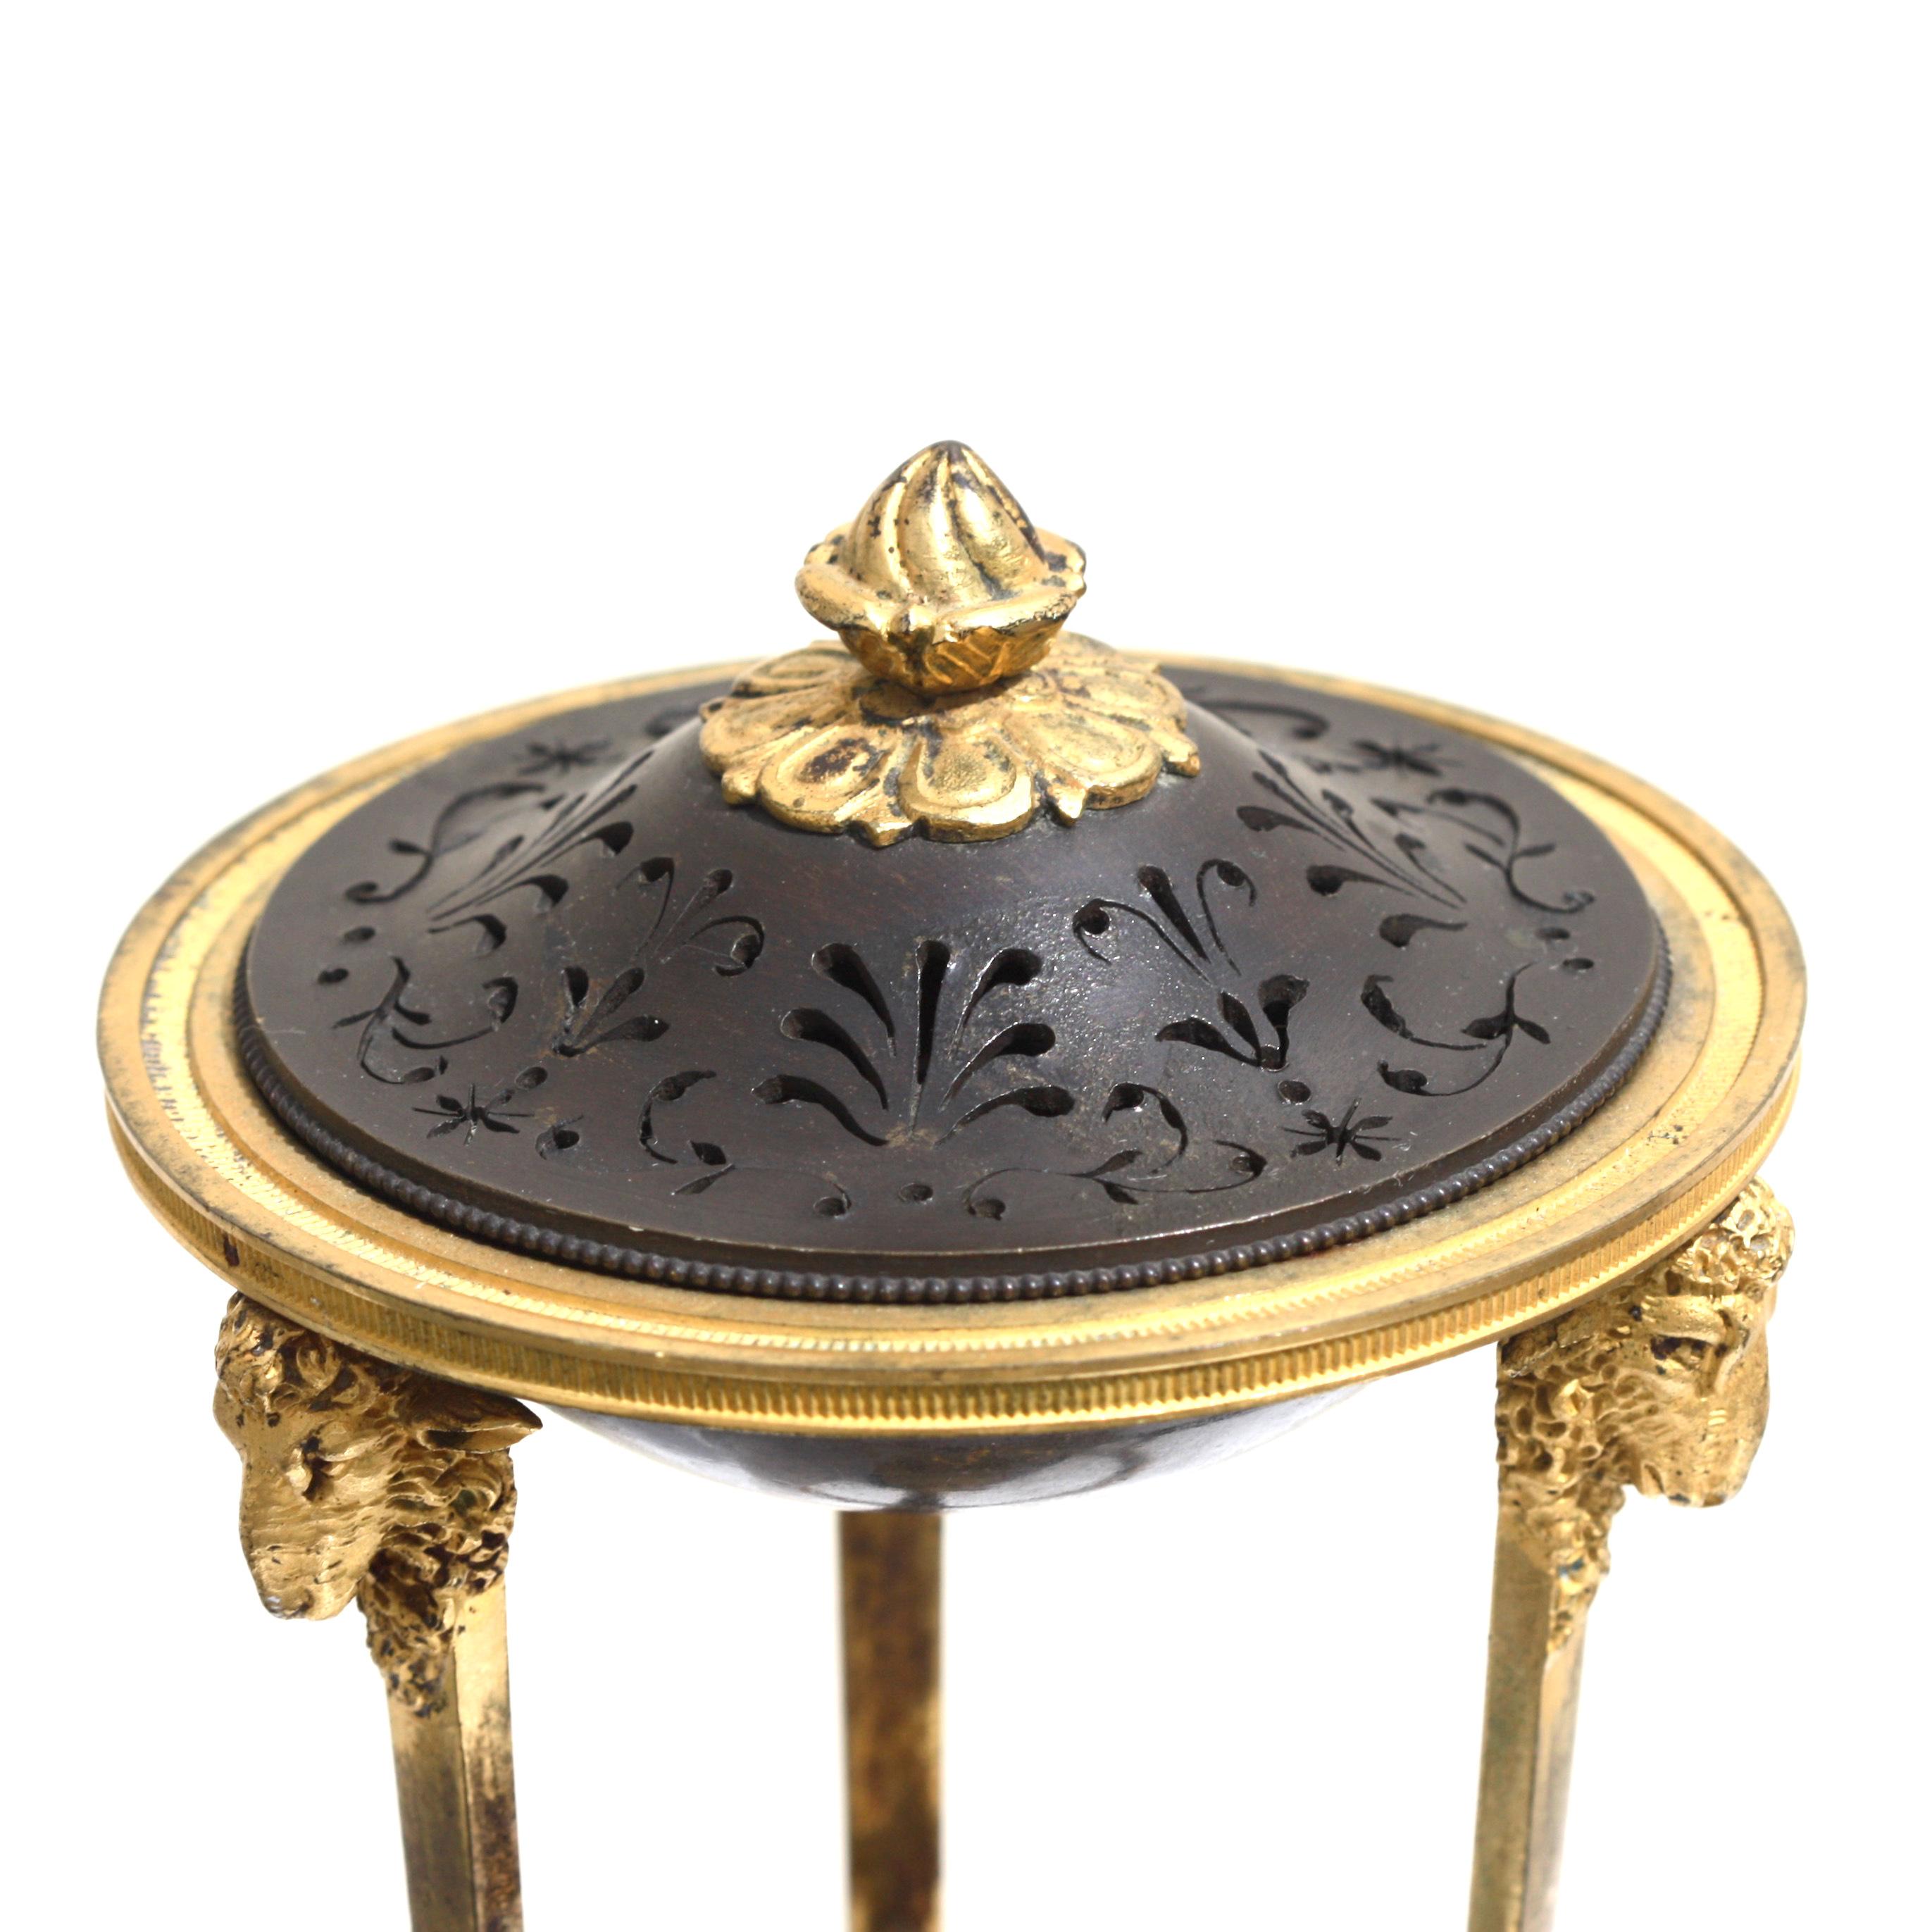 A Louis XVI ormolu and patinated bronze potpourri, raised on a triangular rouge marble base,
France, circa 1880,
Measures: Height 8.5 inches, width 3.75 inches.